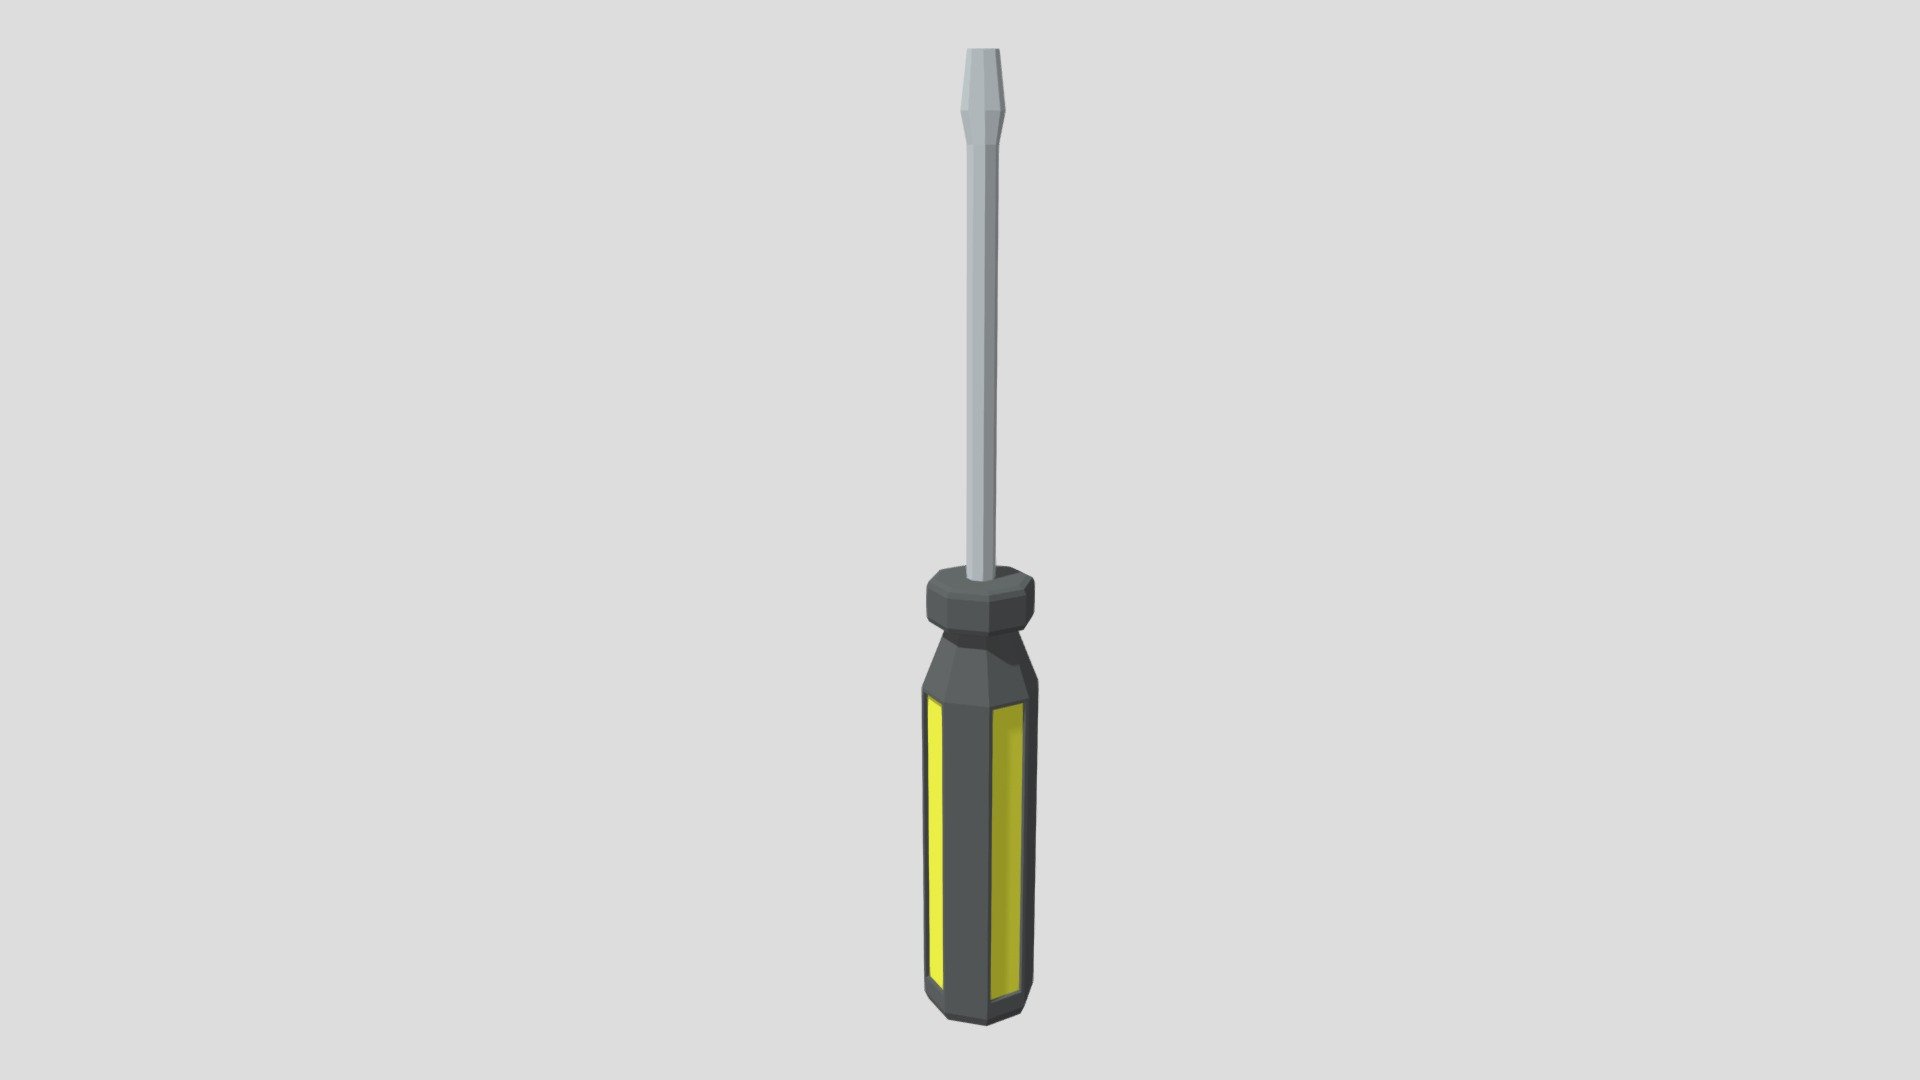 This is a low poly 3D model of a screwdriver. The low poly screwdriver was modeled and prepared for low-poly style renderings, background, general CG visualization presented as 1 mesh with quads only.

Verts : 172 Faces : 170.

The 3D model have simple materials with diffuse colors.

No ring, maps and no UVW mapping is available.

The original file was created in blender. You will receive a 3DS, OBJ, FBX, blend, DAE, Stl, gLTF.

All preview images were rendered with Blender Cycles. Product is ready to render out-of-the-box. Please note that the lights, cameras, and background is only included in the .blend file. The model is clean and alone in the other provided files, centred at origin and has real-world scale 3d model